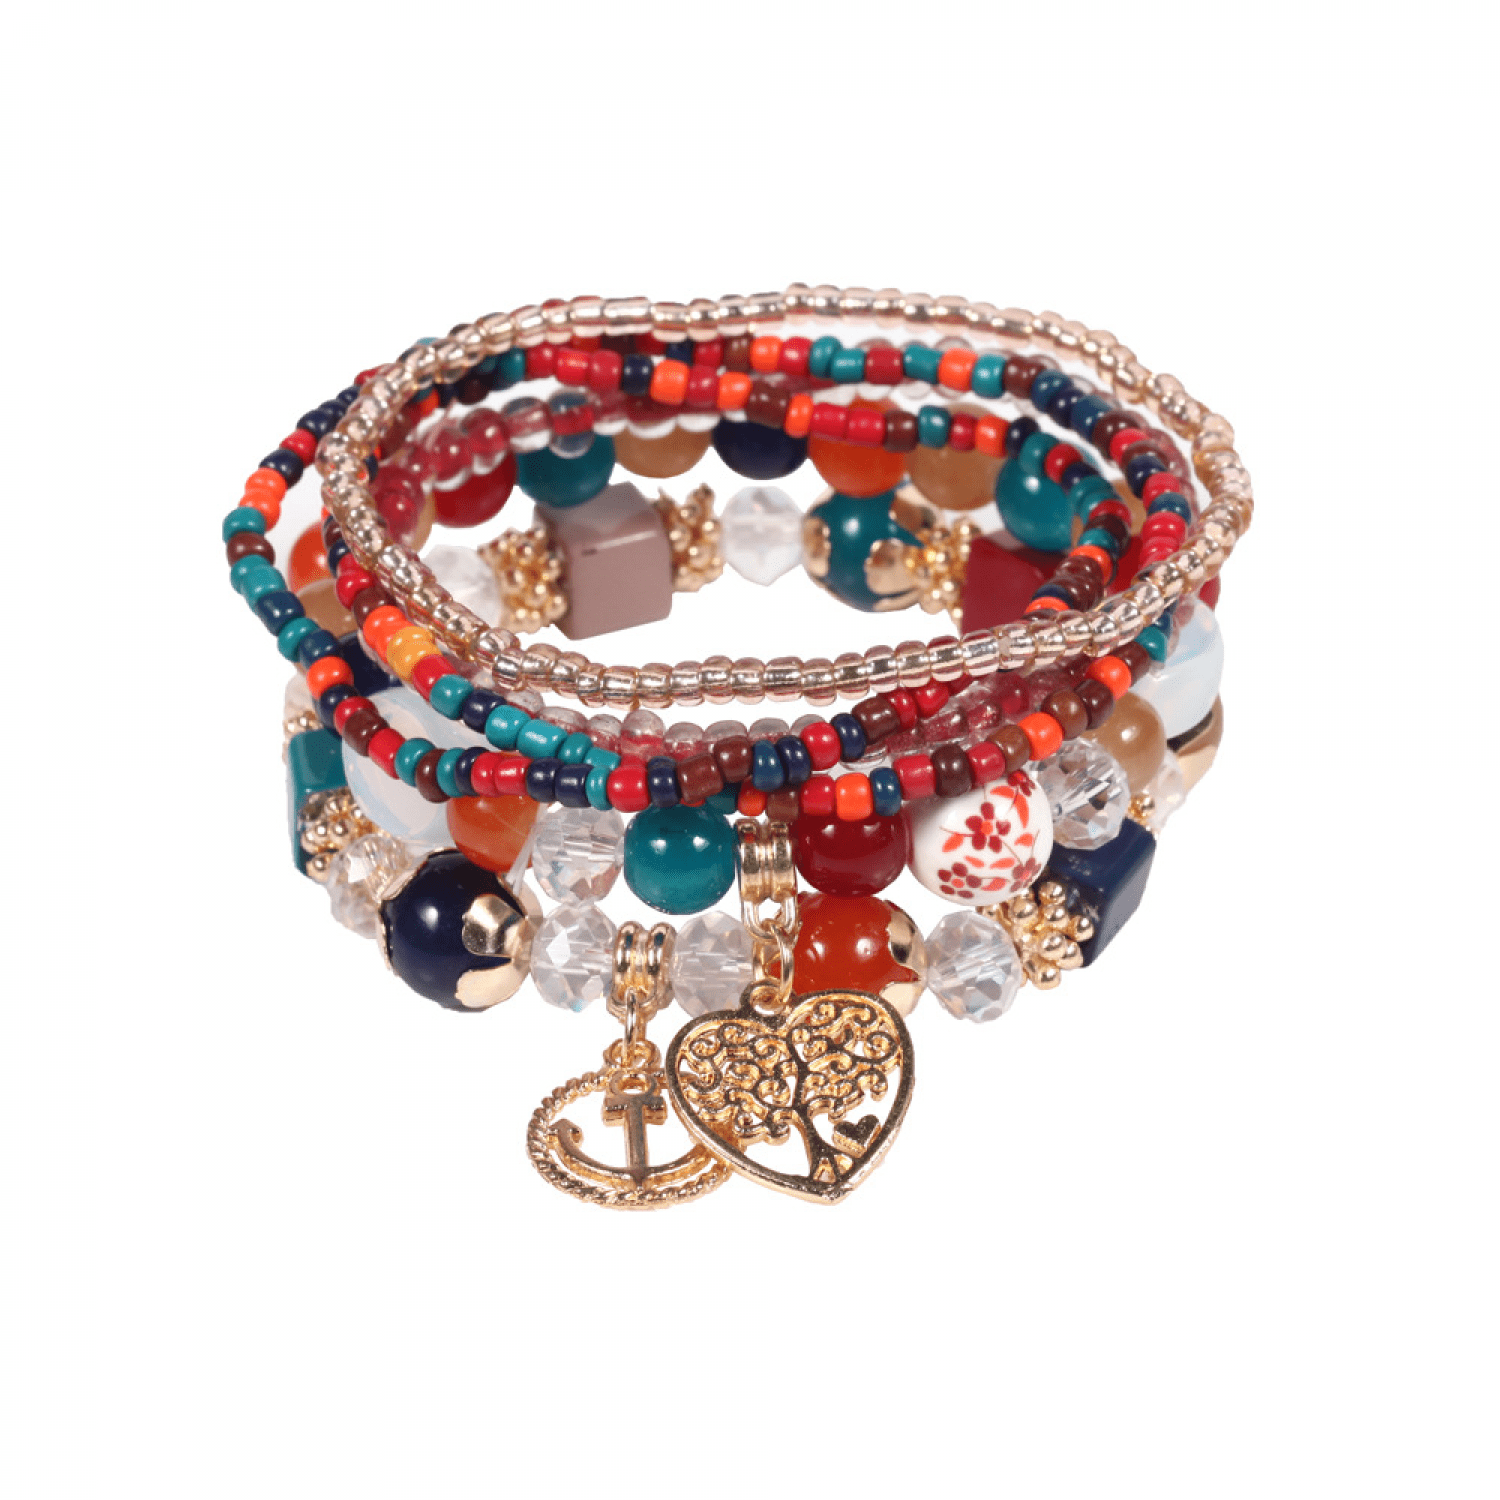 Bohemian Stackable Bracelets for Women Multilayered Stretch Bead